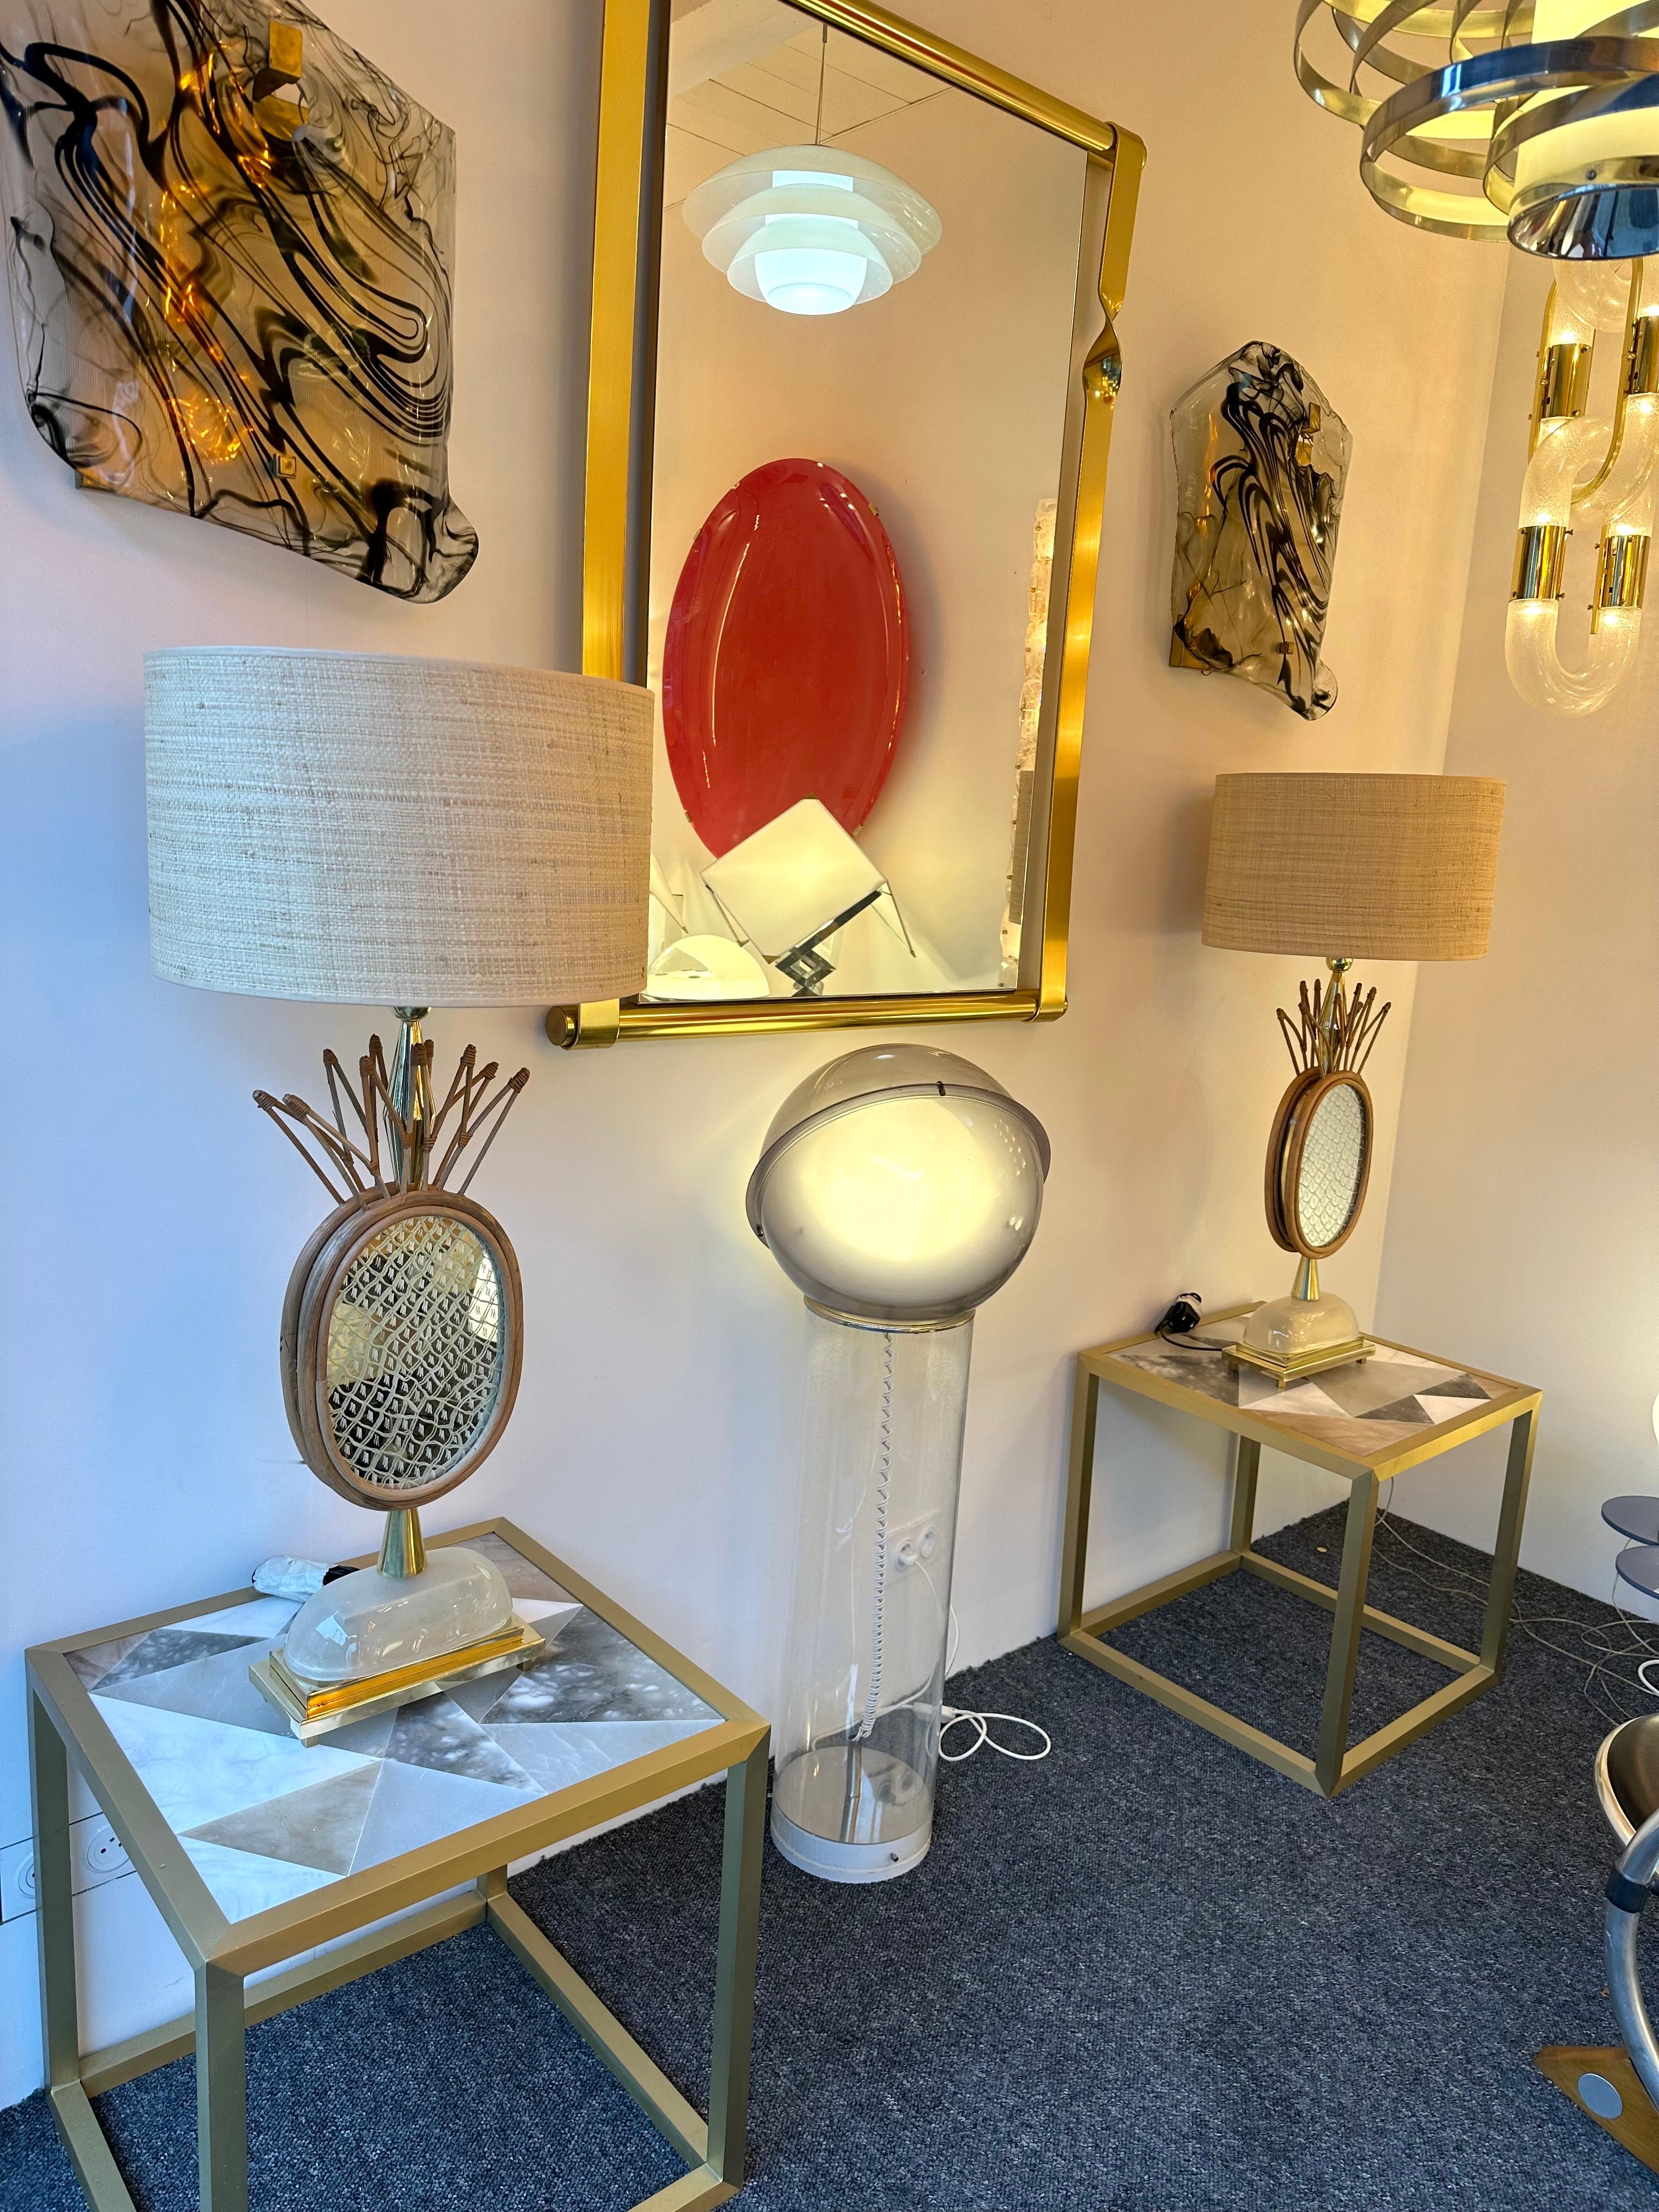 Pair of table or bedside brass, rattan wicker and engraved mirror pineapple lamps. Contemporary work from a small italian artisanal workshop.

Demo shades non included. Measurements in description with demo shades
Measurements lamps only H 81 x W